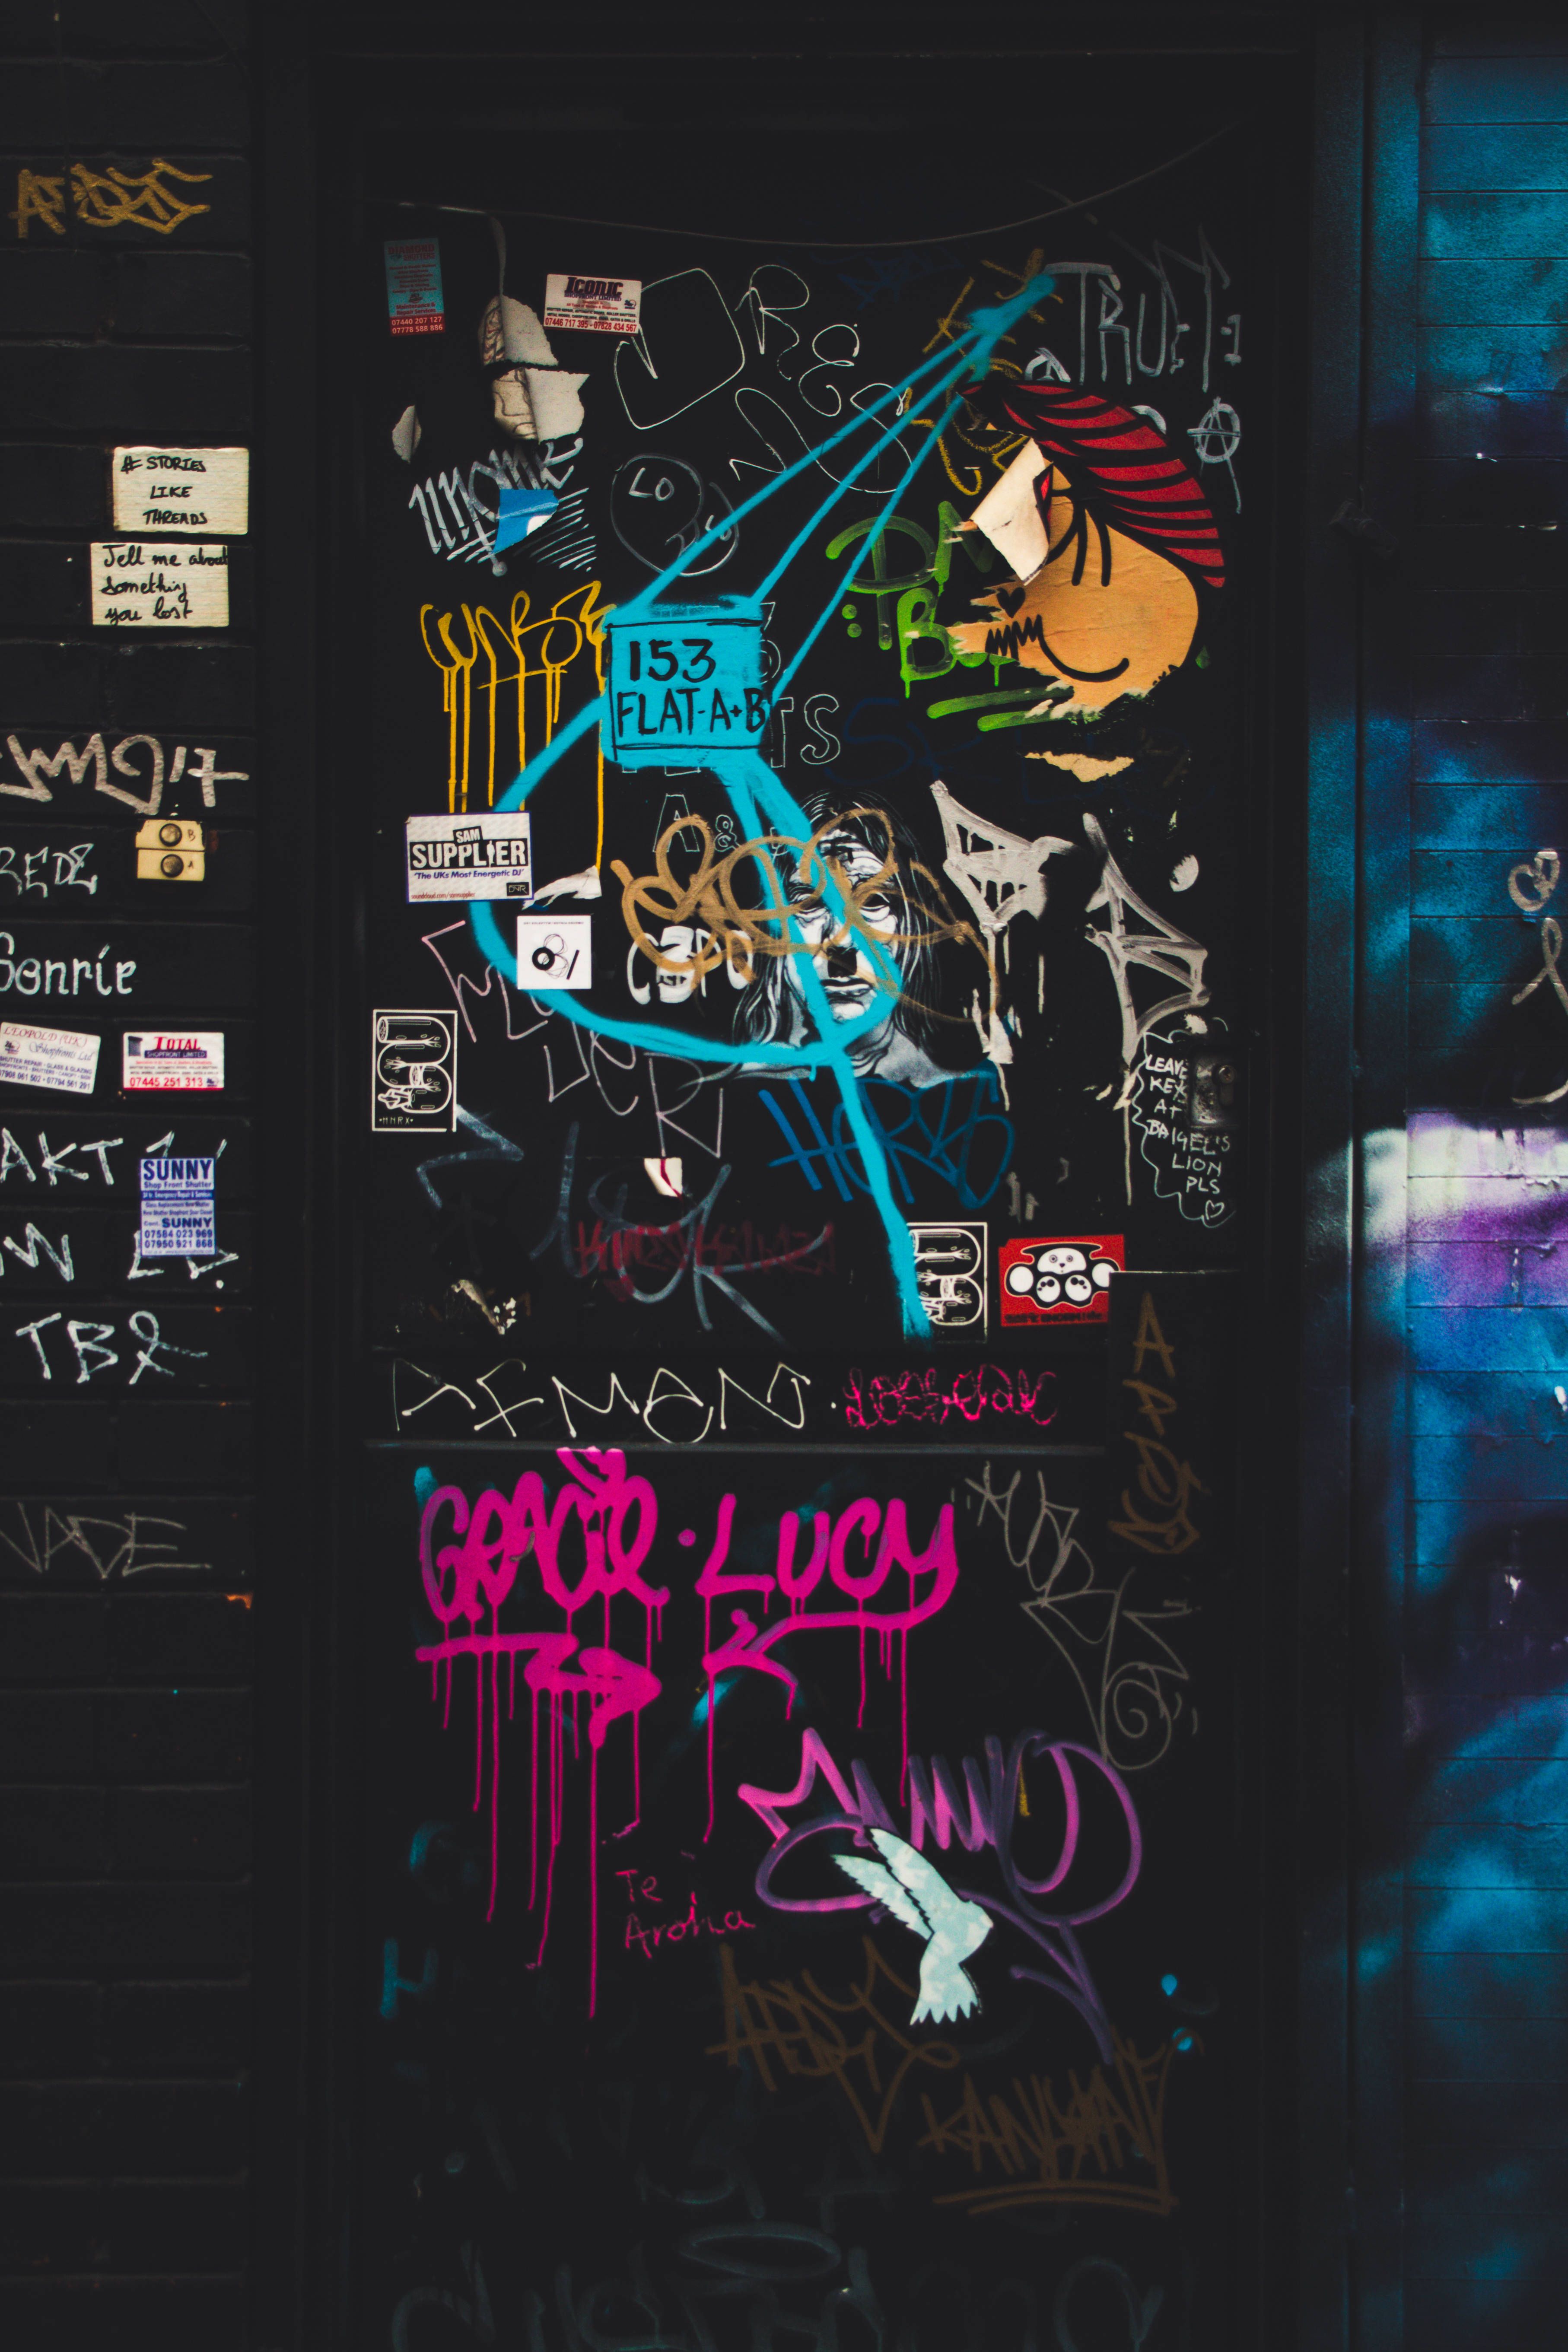 A door with graffiti on it and some stickers - Street art, graffiti